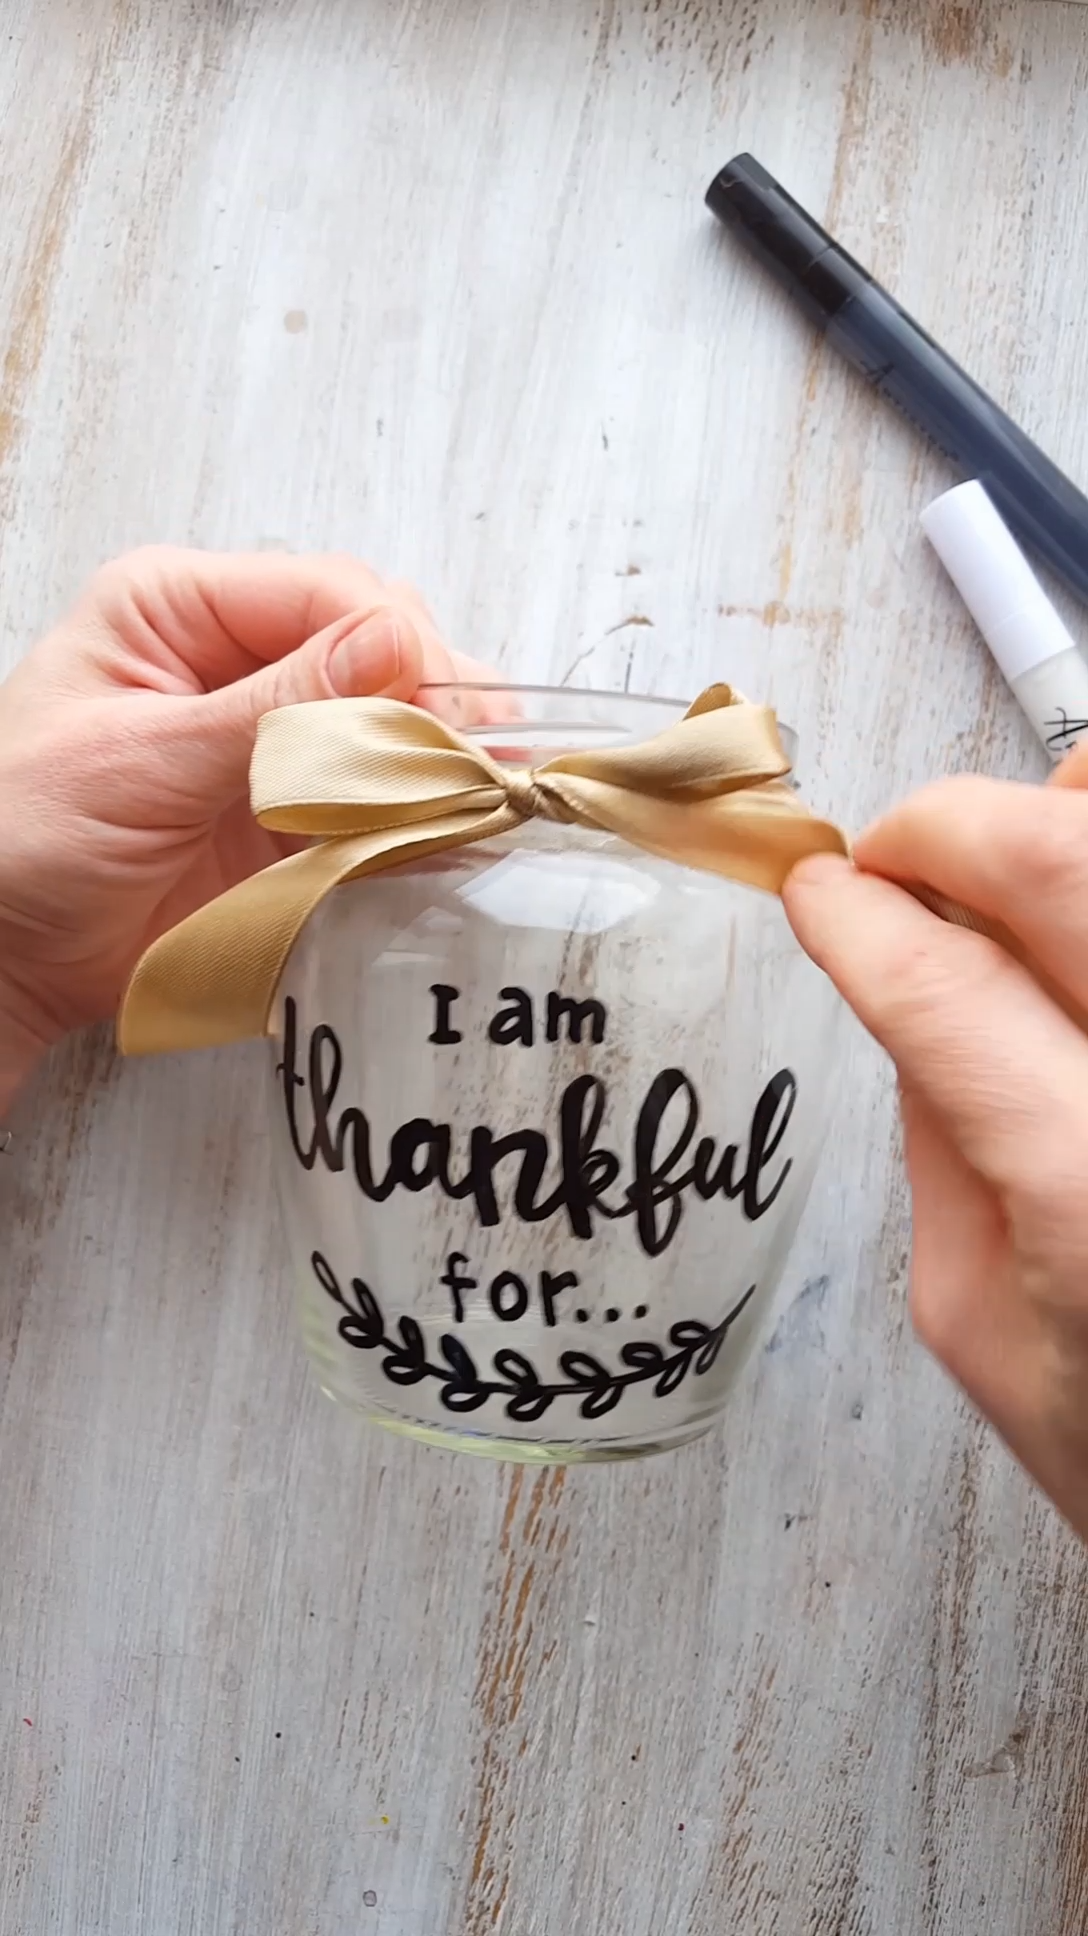 I am thankful for... - I am thankful for... -   20 diy and crafts projects